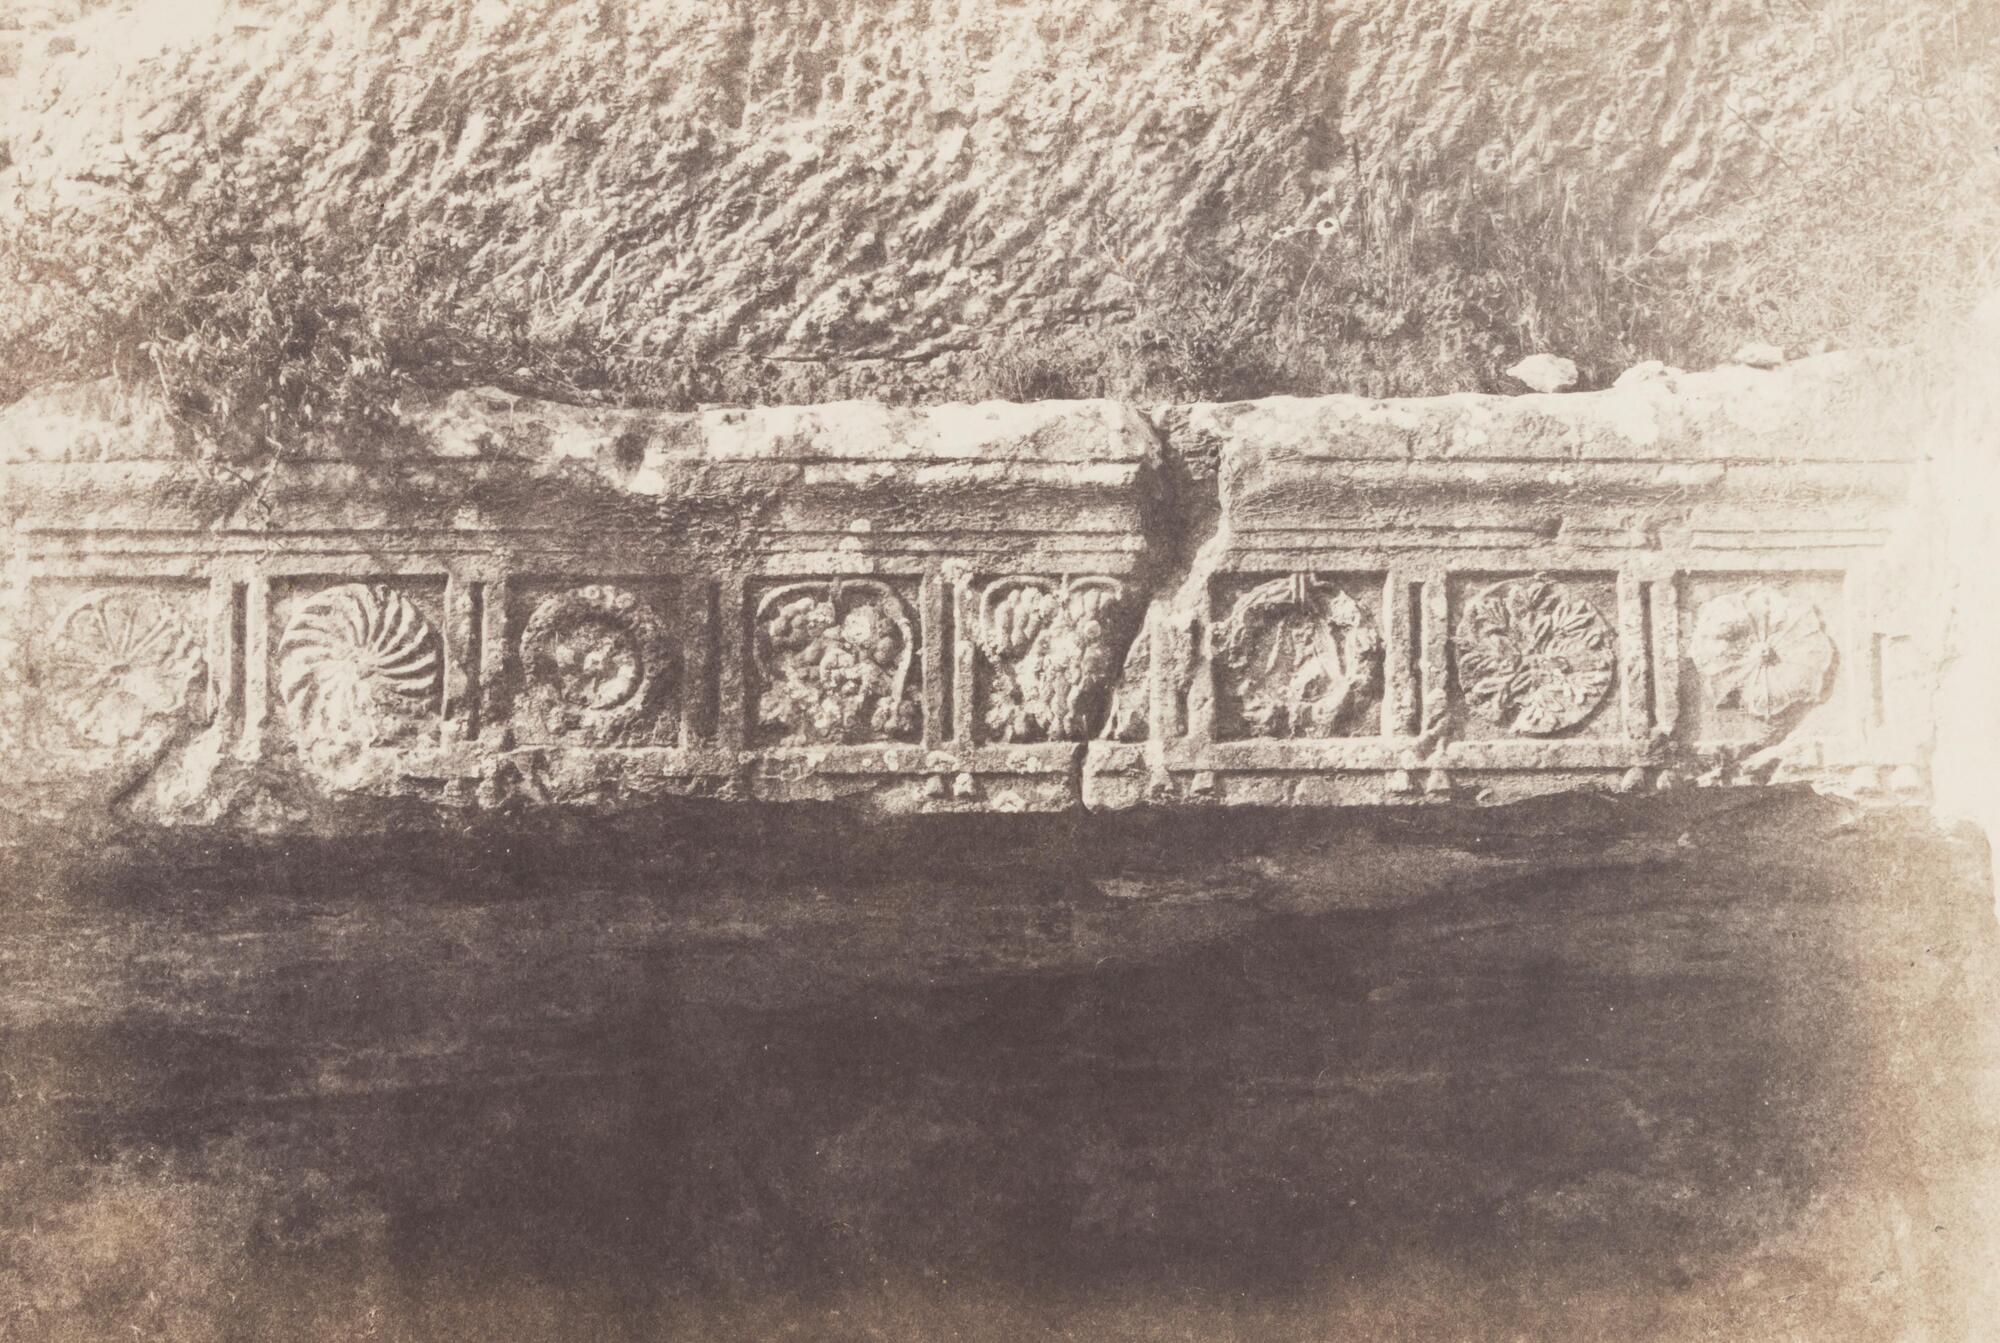 Photograph of a large stone carving occupies the center of the image. Above is rough-cut stone, indicating that the carving is part of a larger stone setting; below is a recess and darkness, indicating that the carving acts as a kind of decorative lintel above a cave entrance. The carving itself consists of eight square zones (or metopes) and within each is a decorative pattern of radial symmetry (circles) or vegetative imagery. The frieze is located above the entrance to the Apostles' Retreat, Valley of Hinnom in Jerusalem.